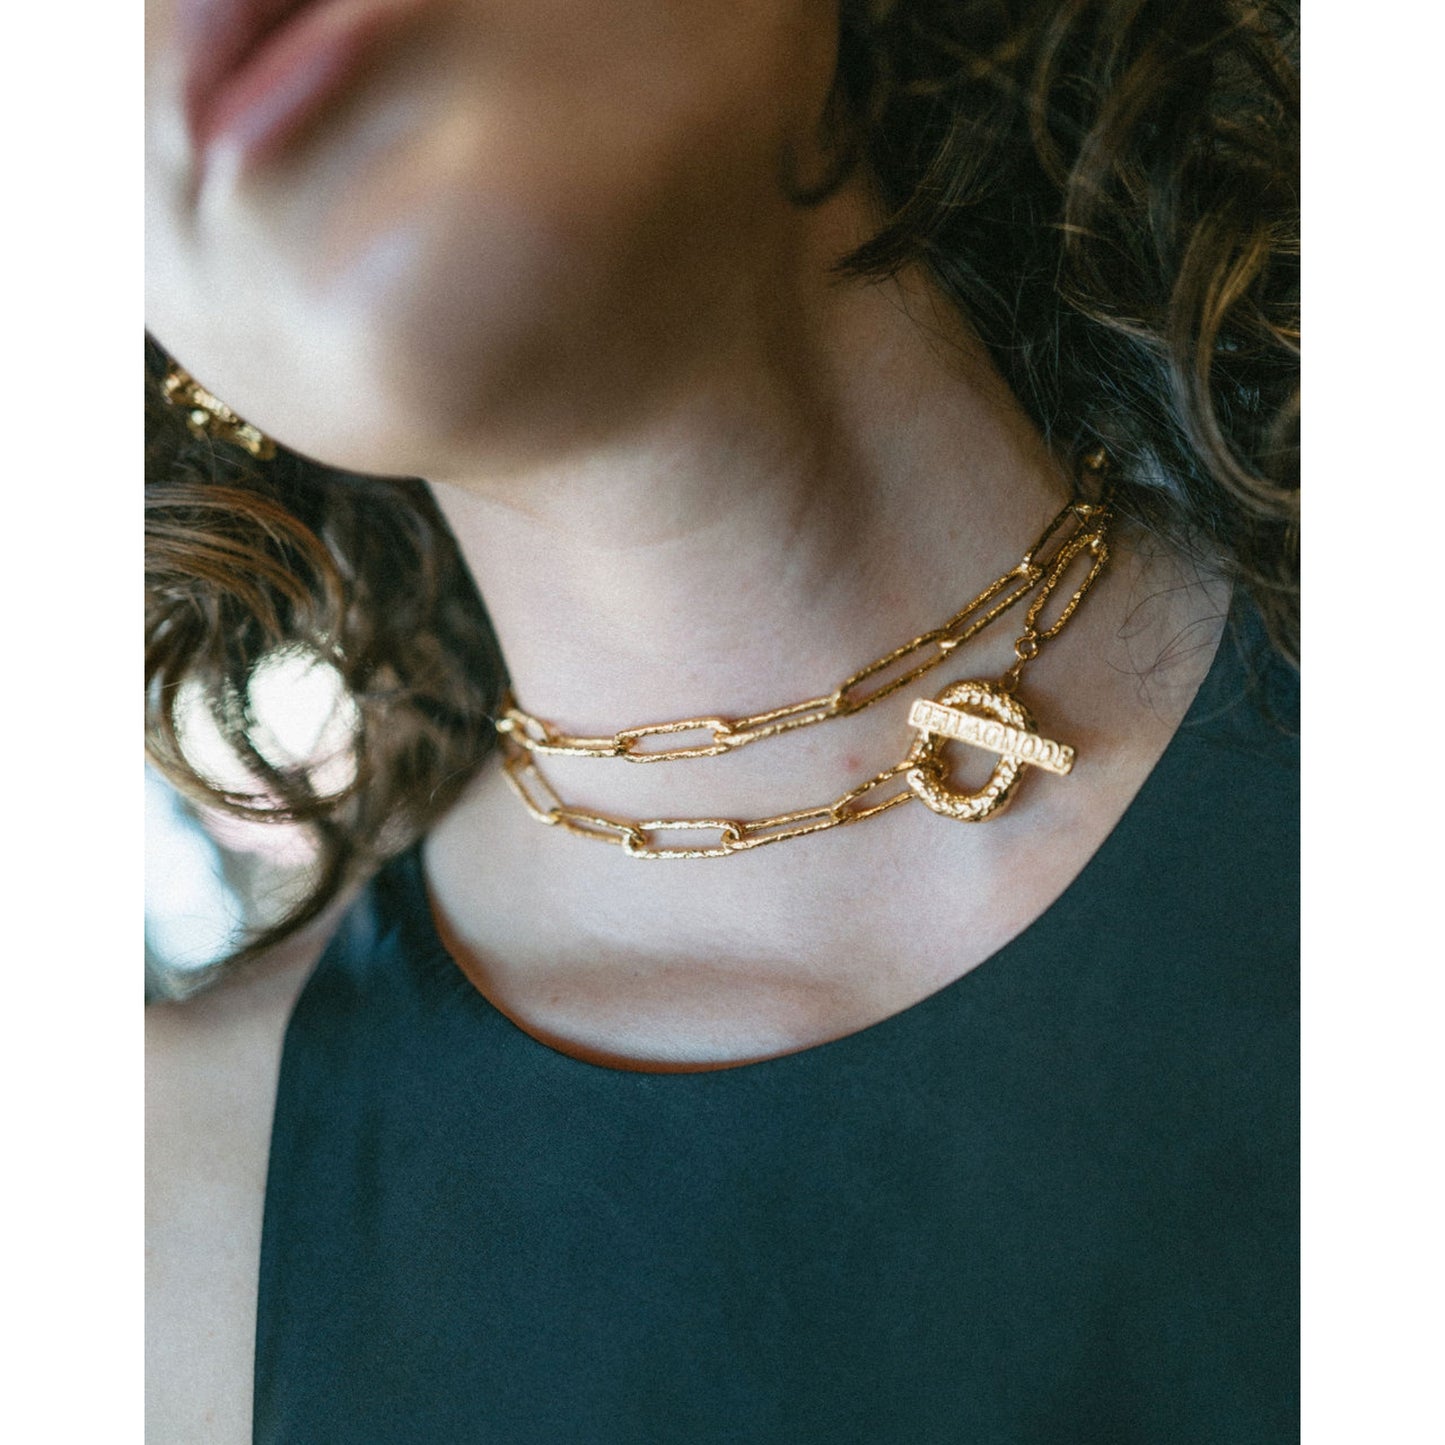 Simple Connection Chain Necklace (Gold)